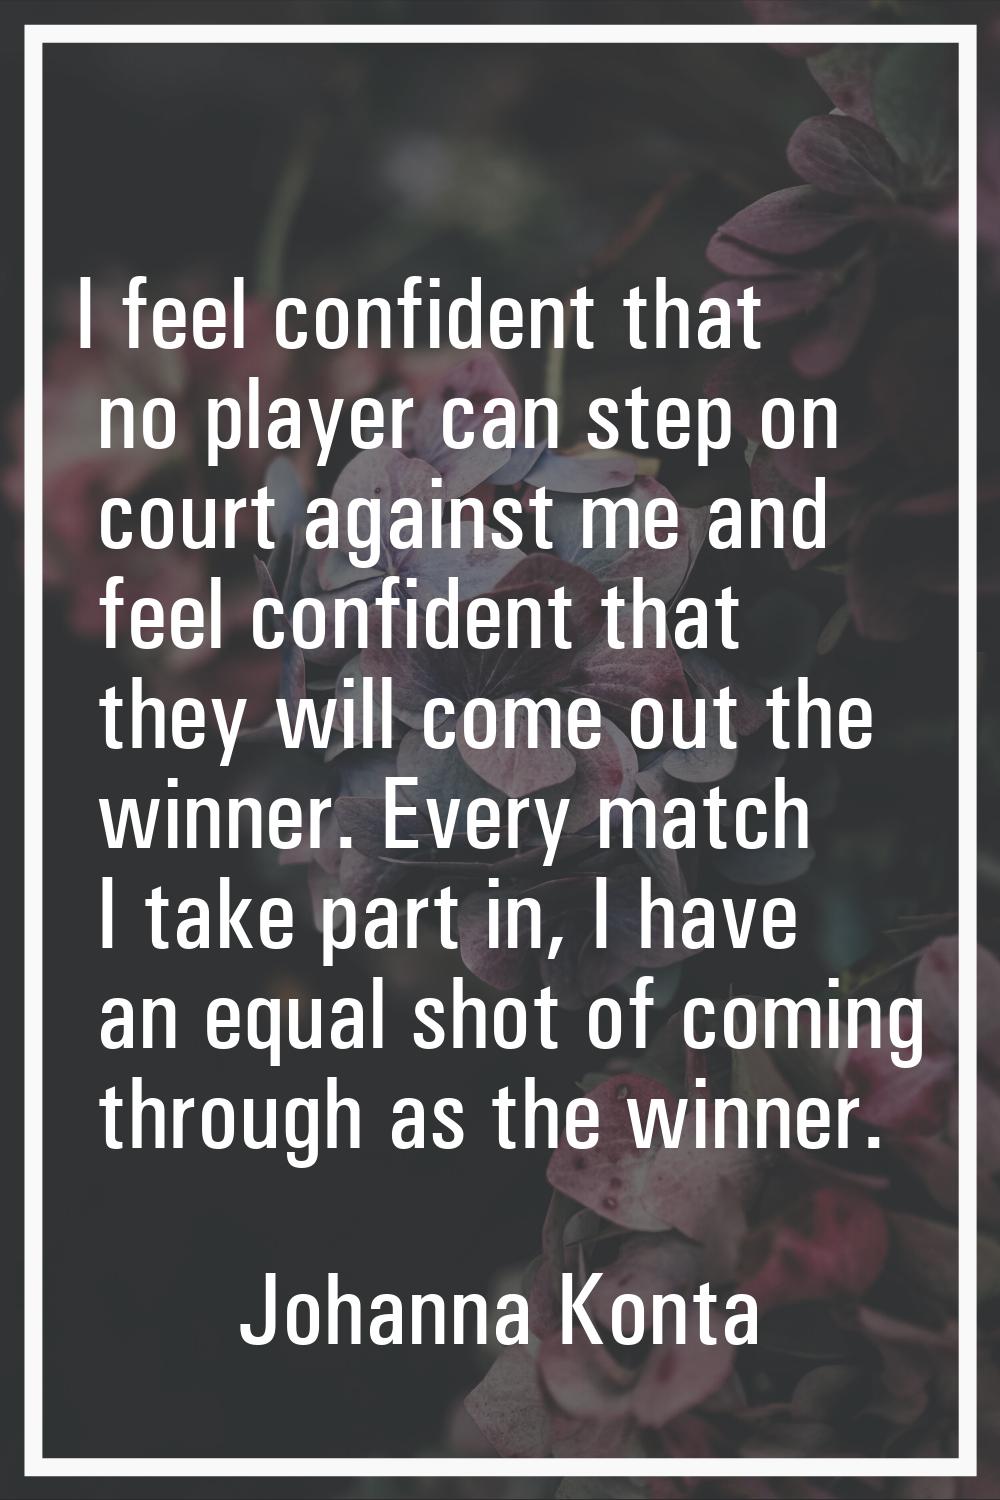 I feel confident that no player can step on court against me and feel confident that they will come